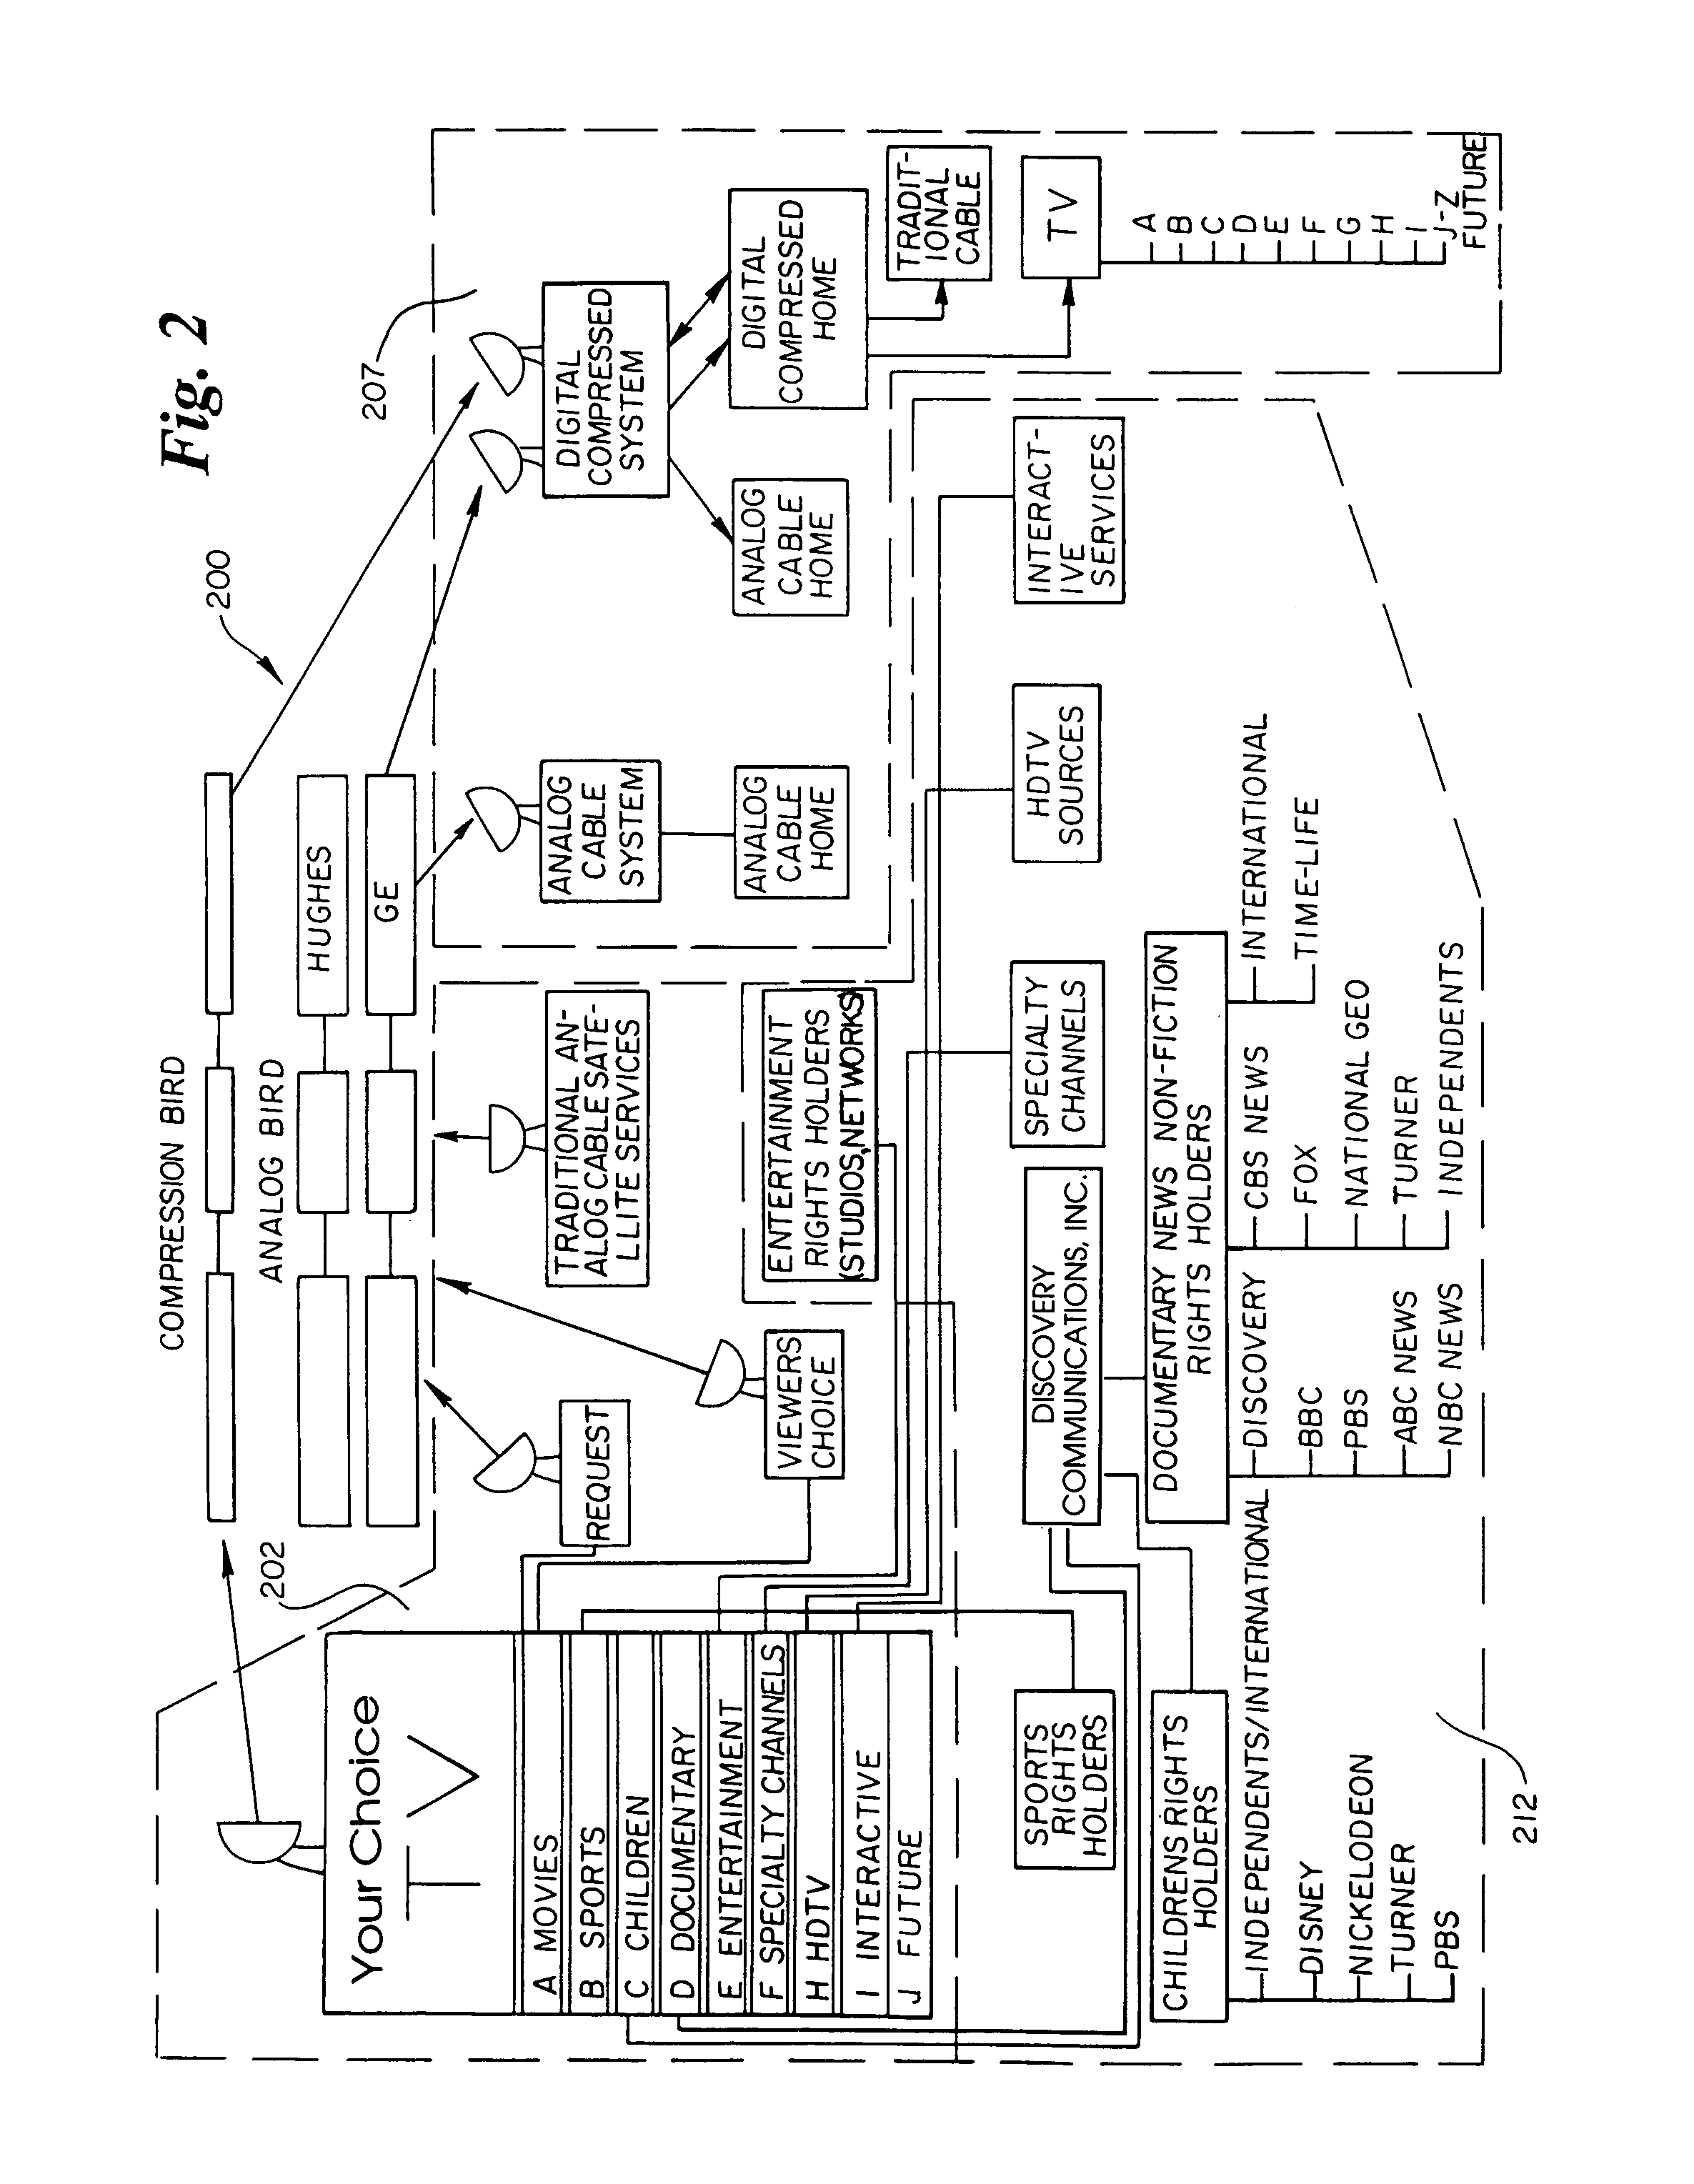 Method and apparatus for interactive program suggestion